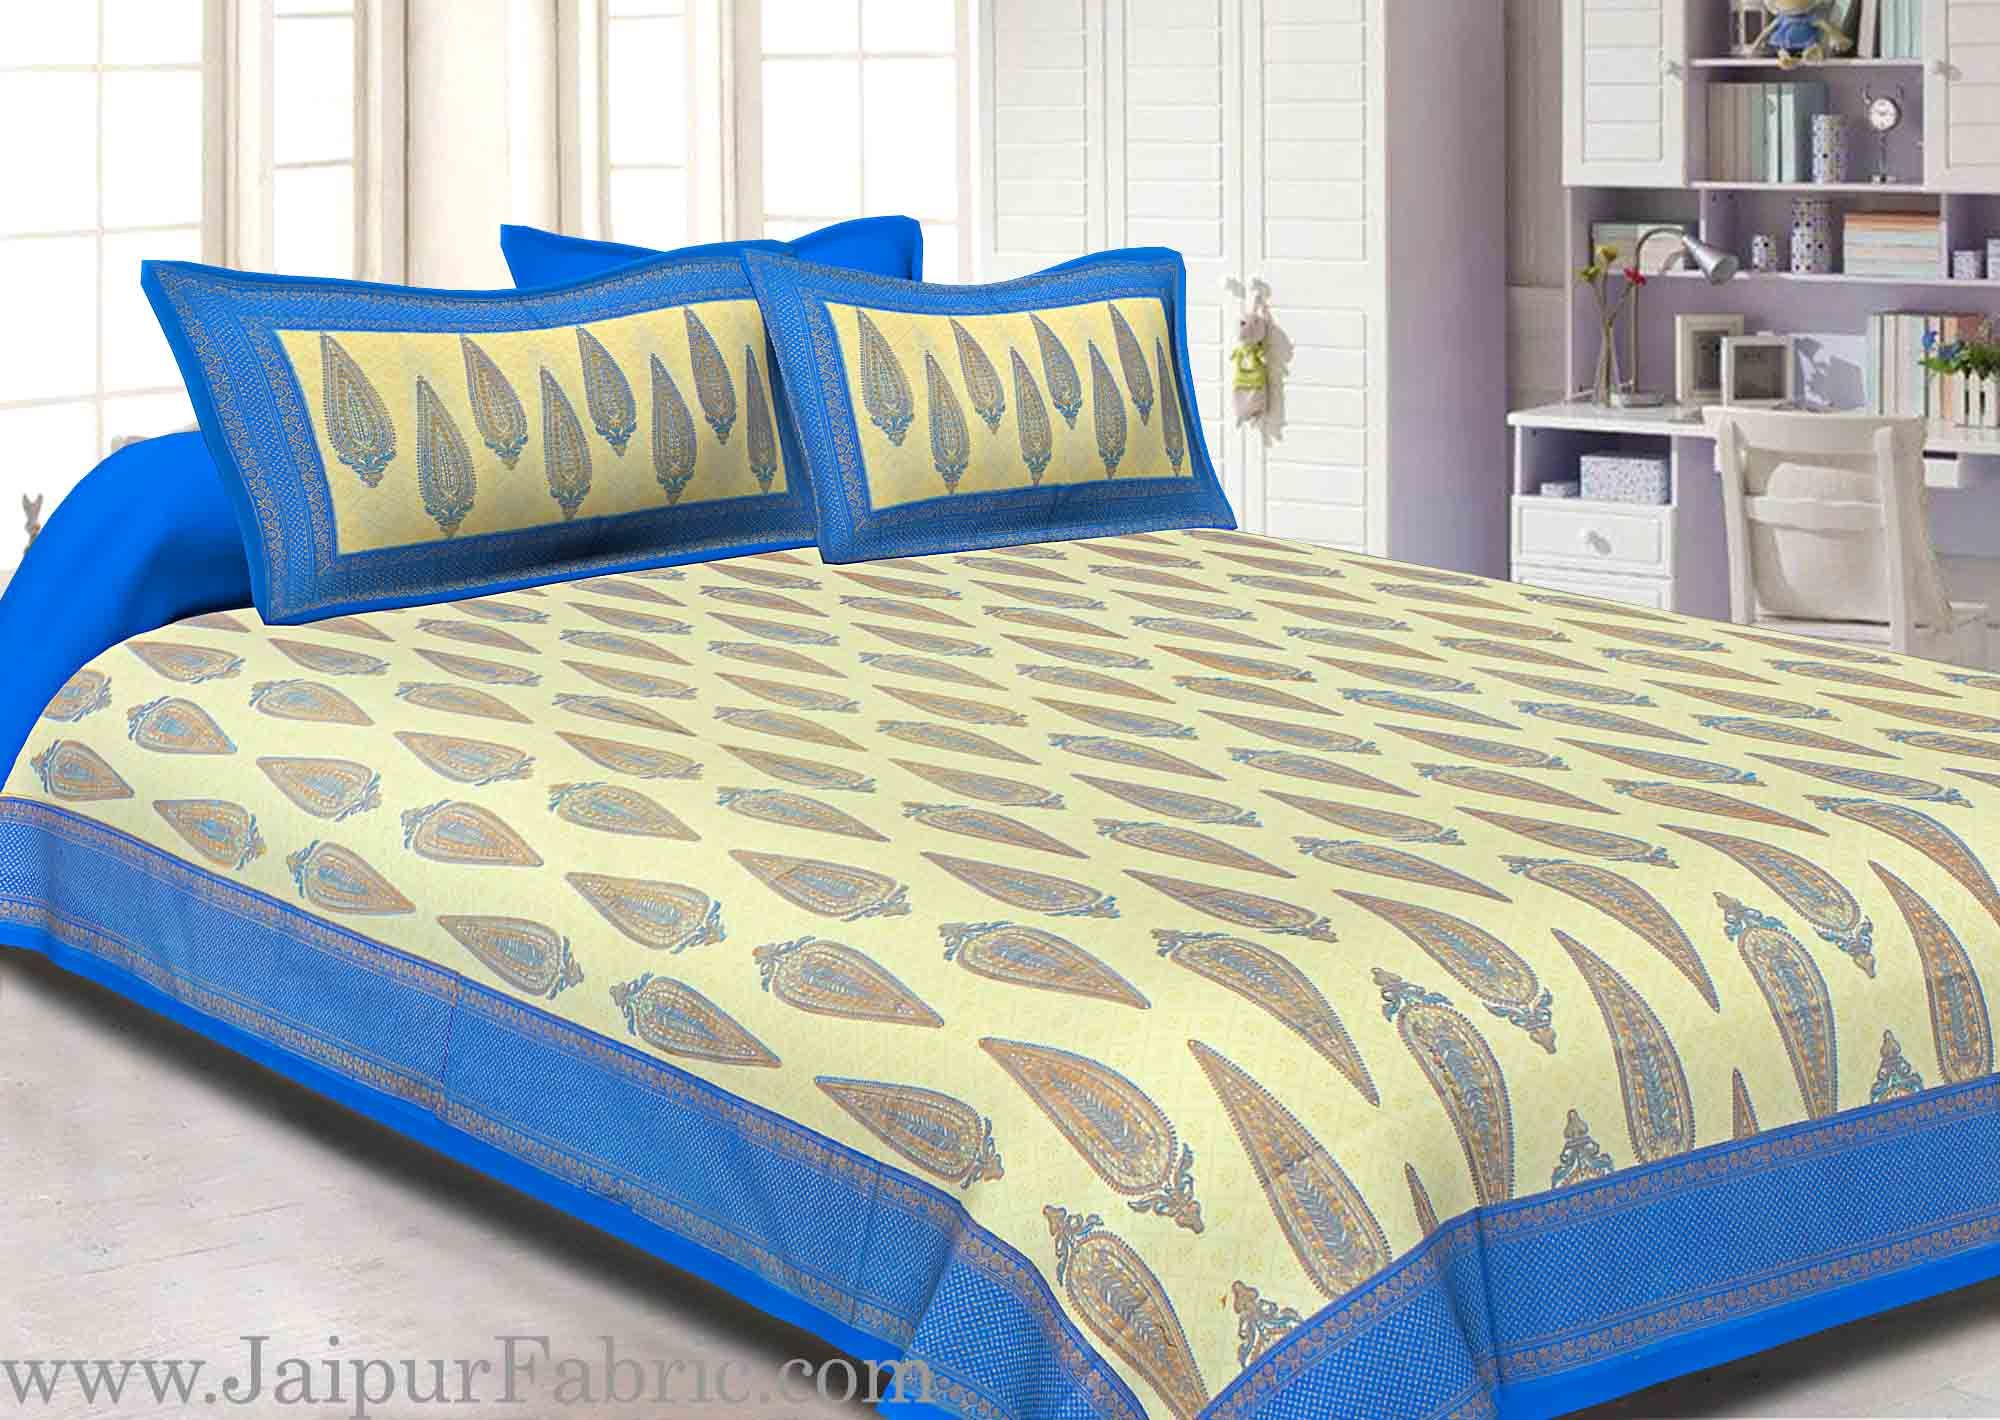 King Size Bedsheet Blue Border Golden Paisley Print With Two Pillow Cover